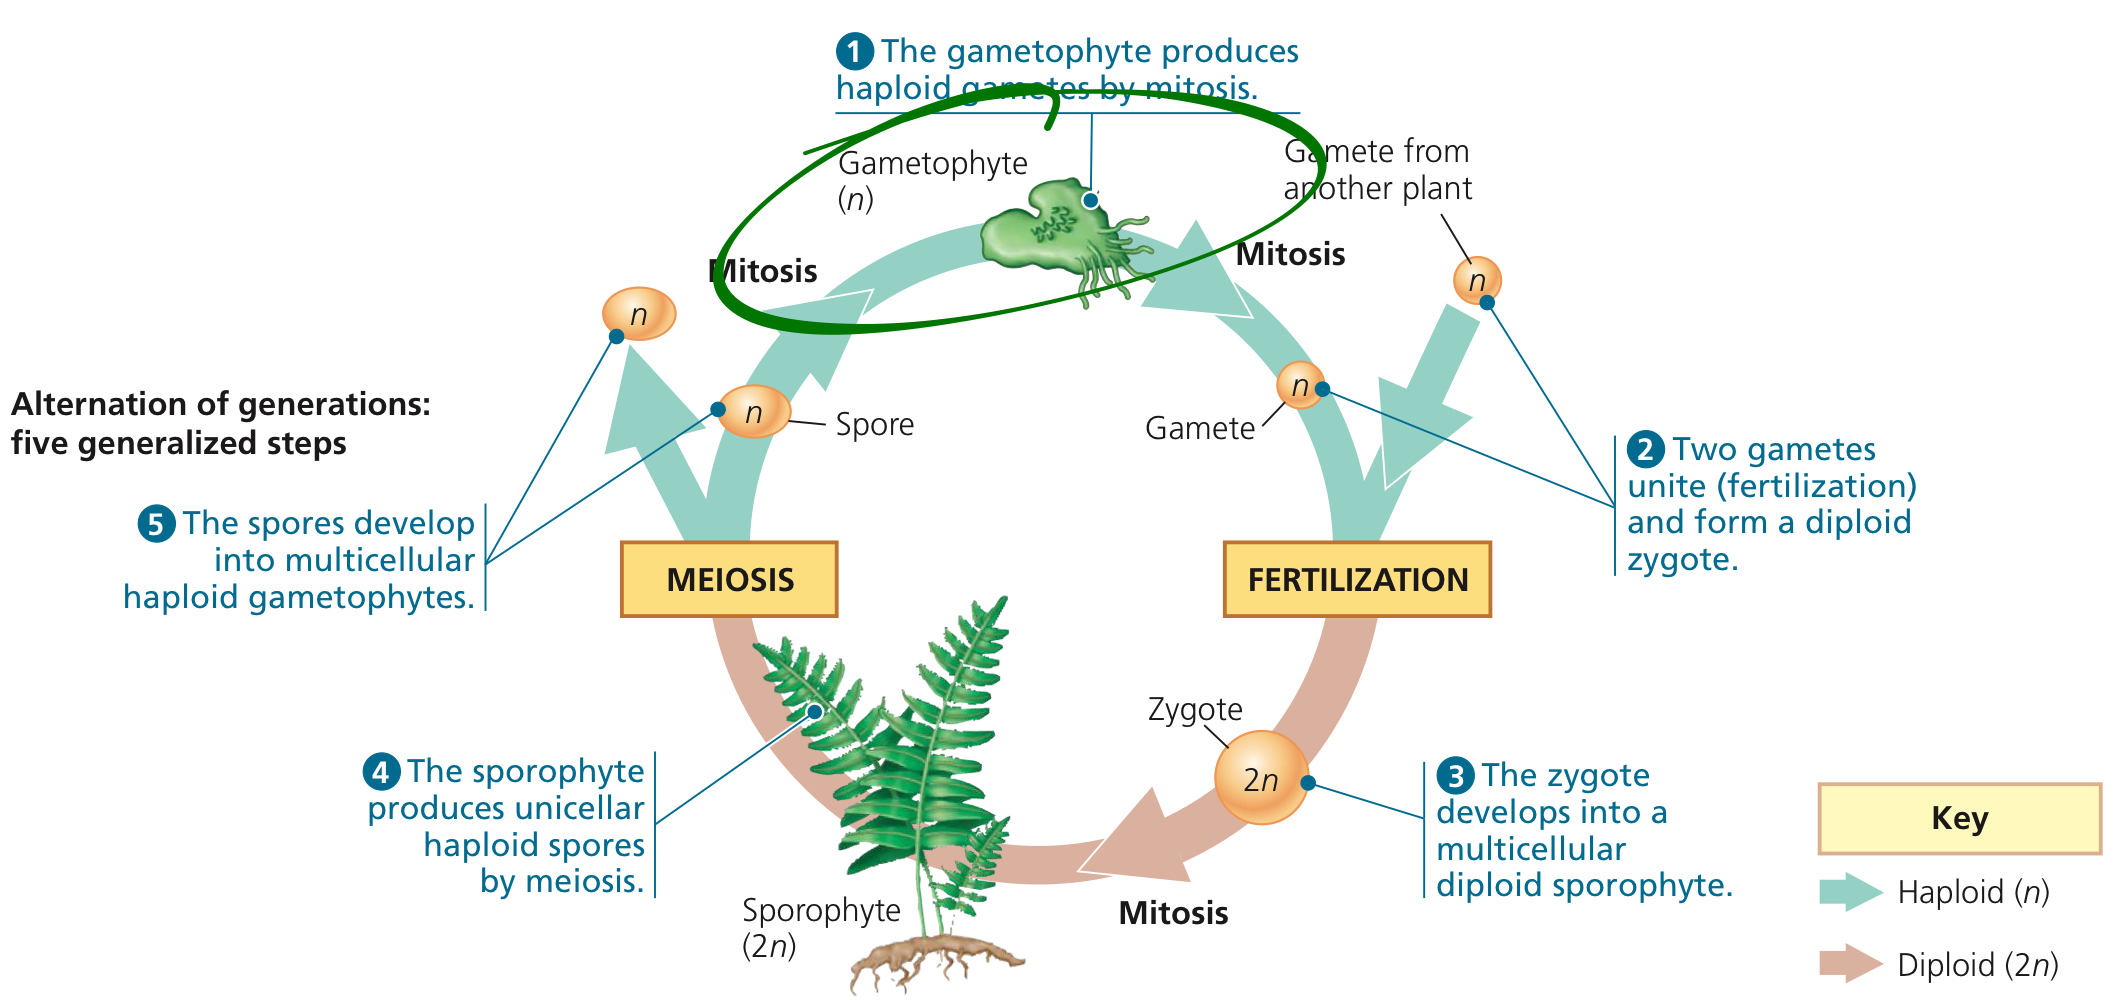 <p>Multicellular haploid body form of plants producing gametes via mitosis.</p>